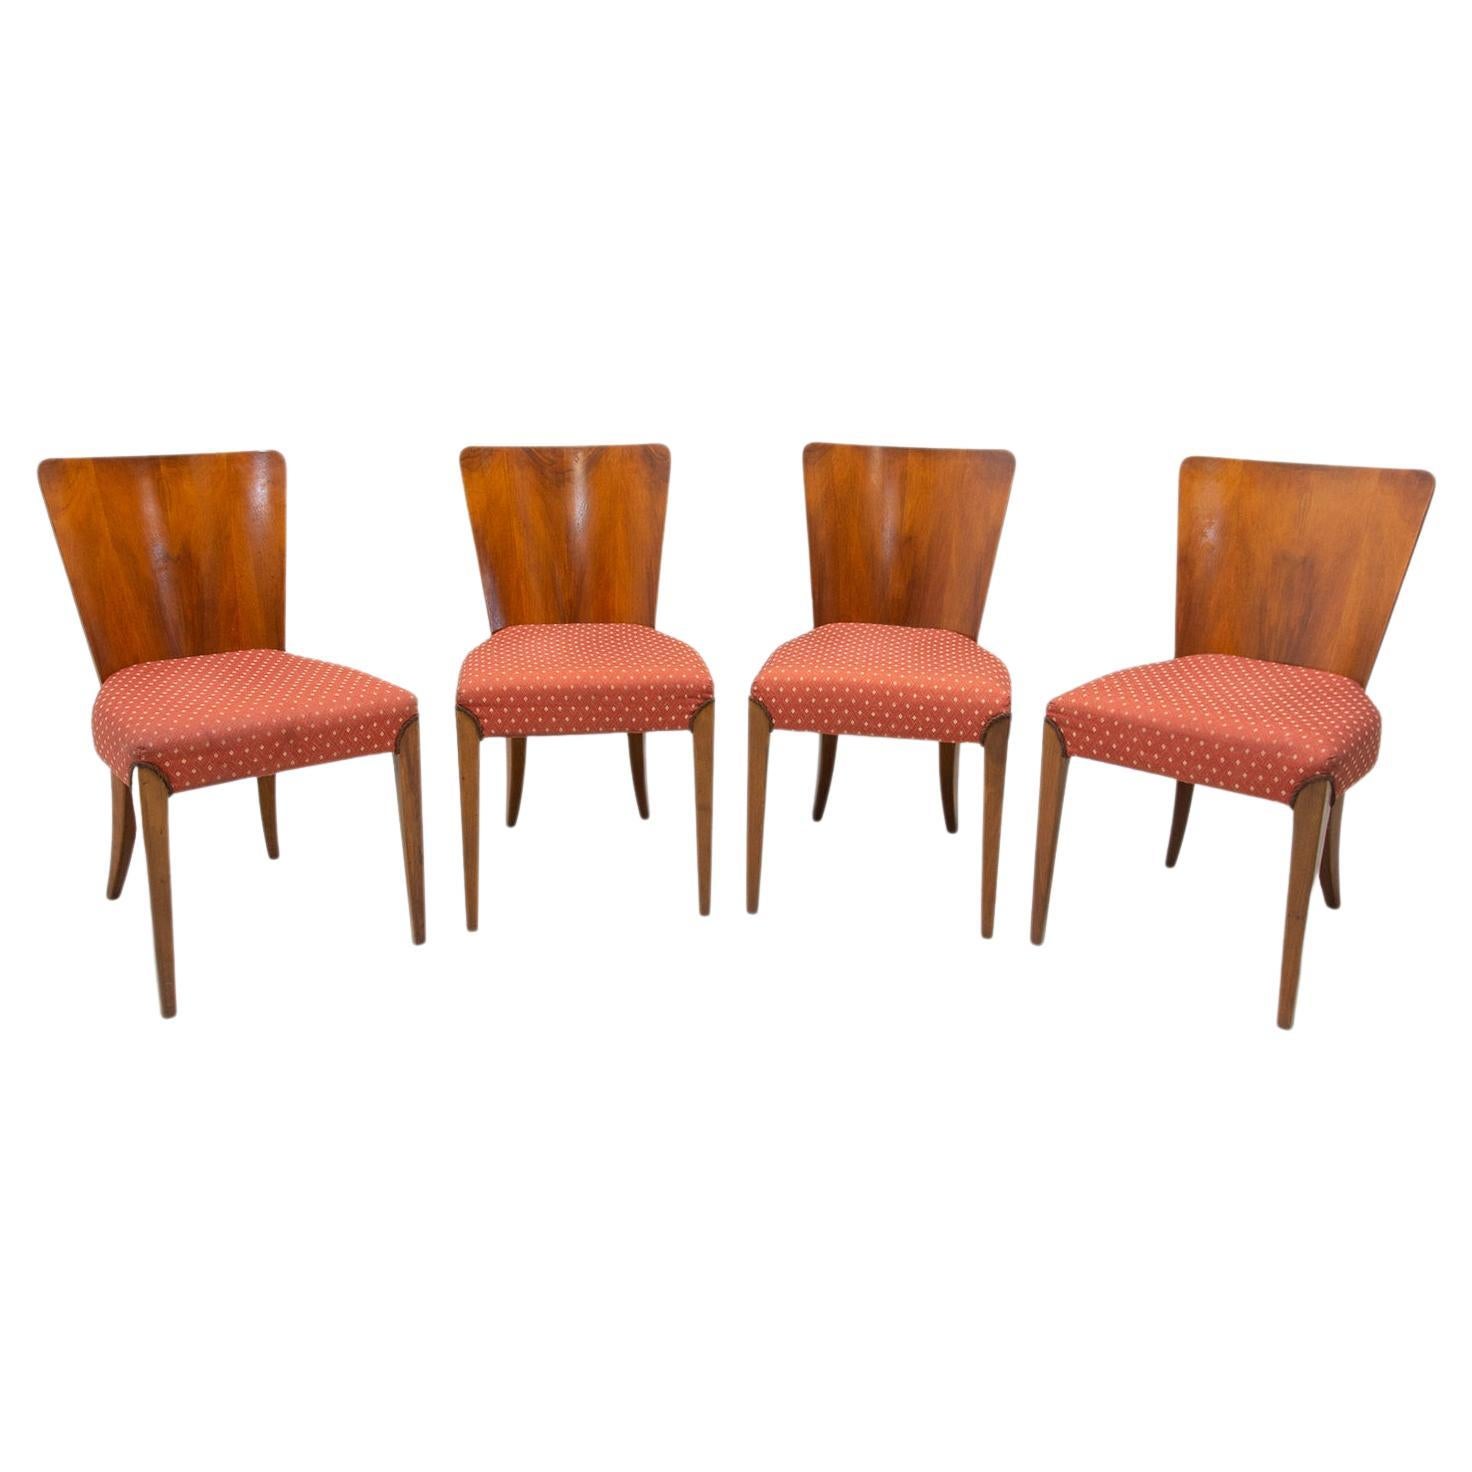 UP Závody Dining Room Chairs